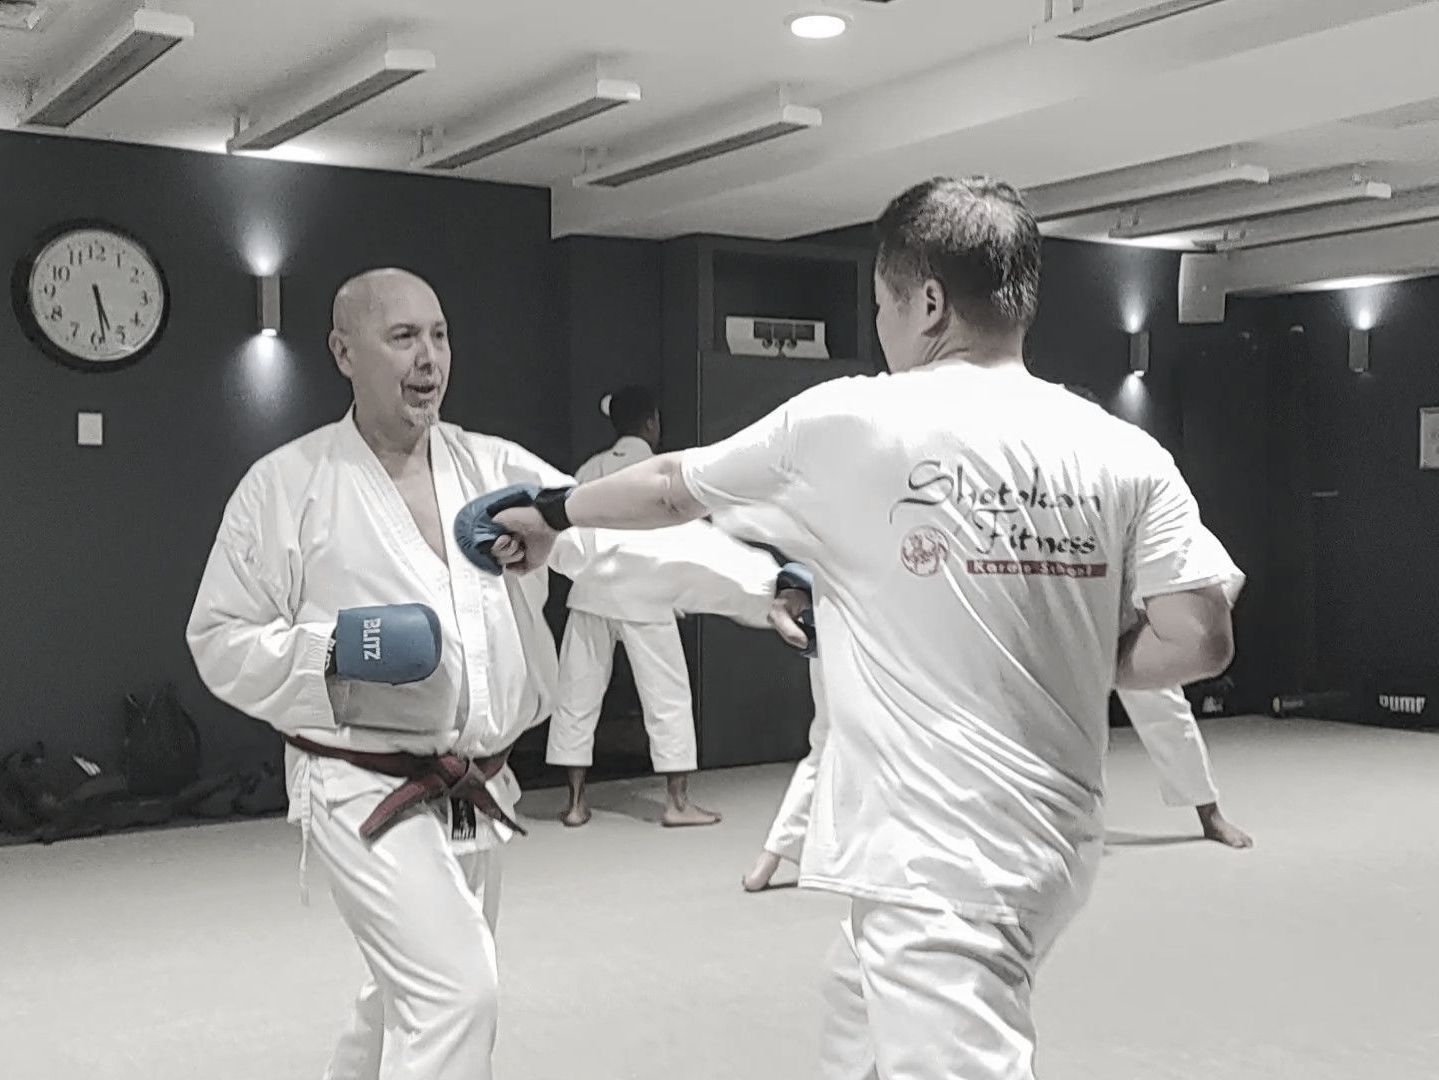 Karate classes, Martial art classes, Self-defence classes, in London, Paddington, W2 and the surrounding areas.